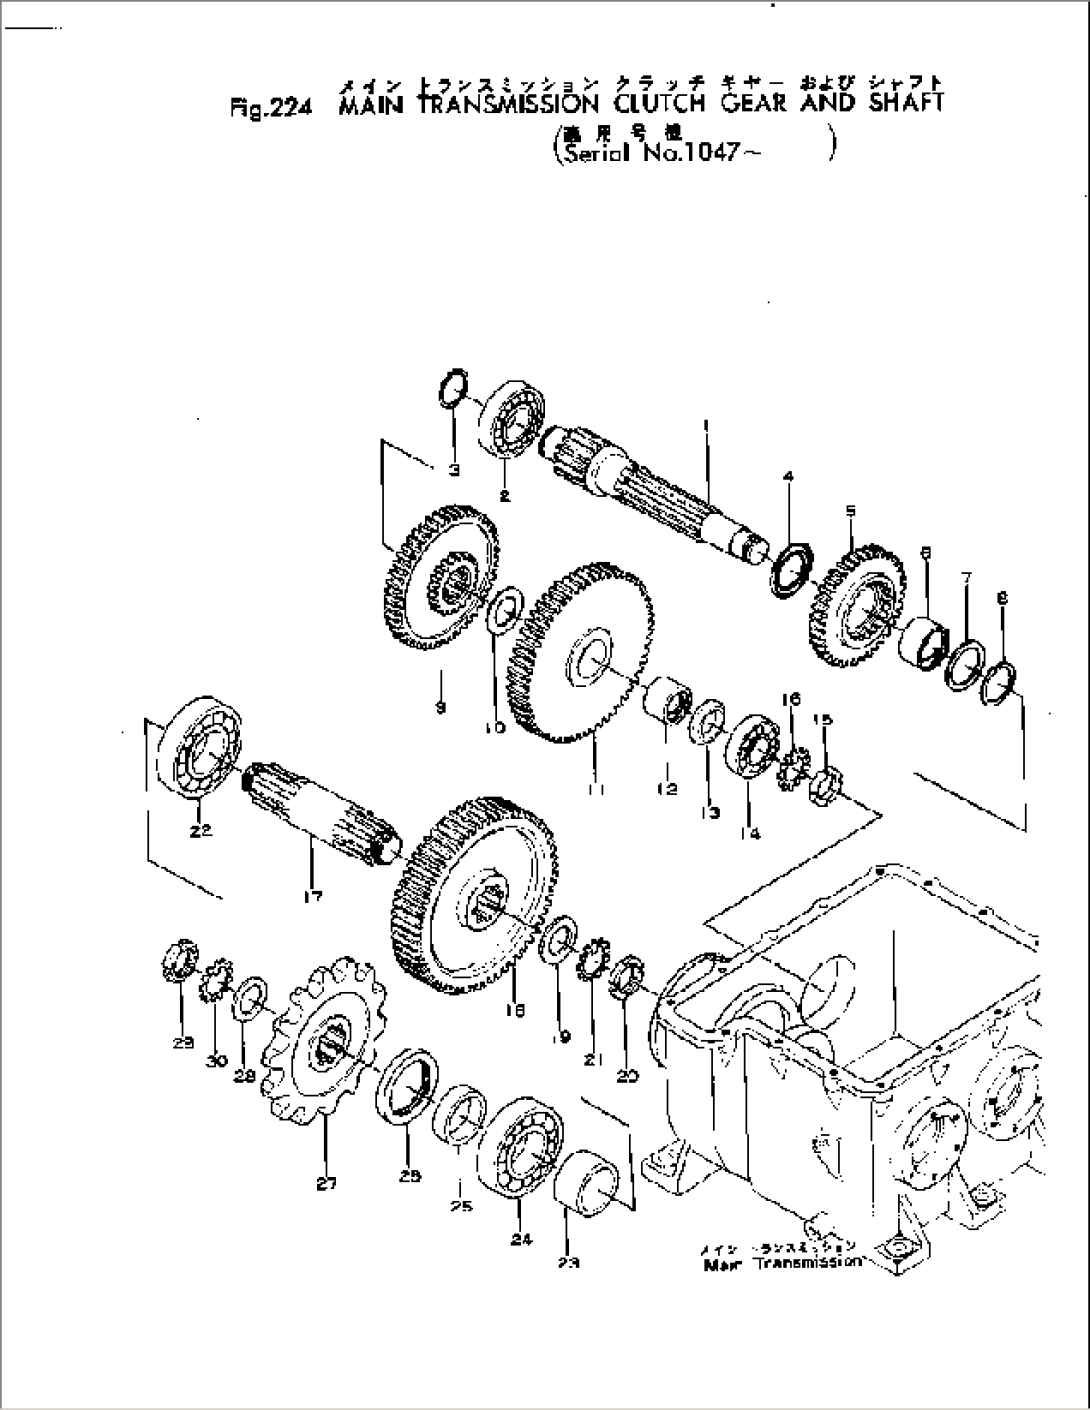 MAIN TRANSMISSION CLUTCH GEAR AND SHAFT